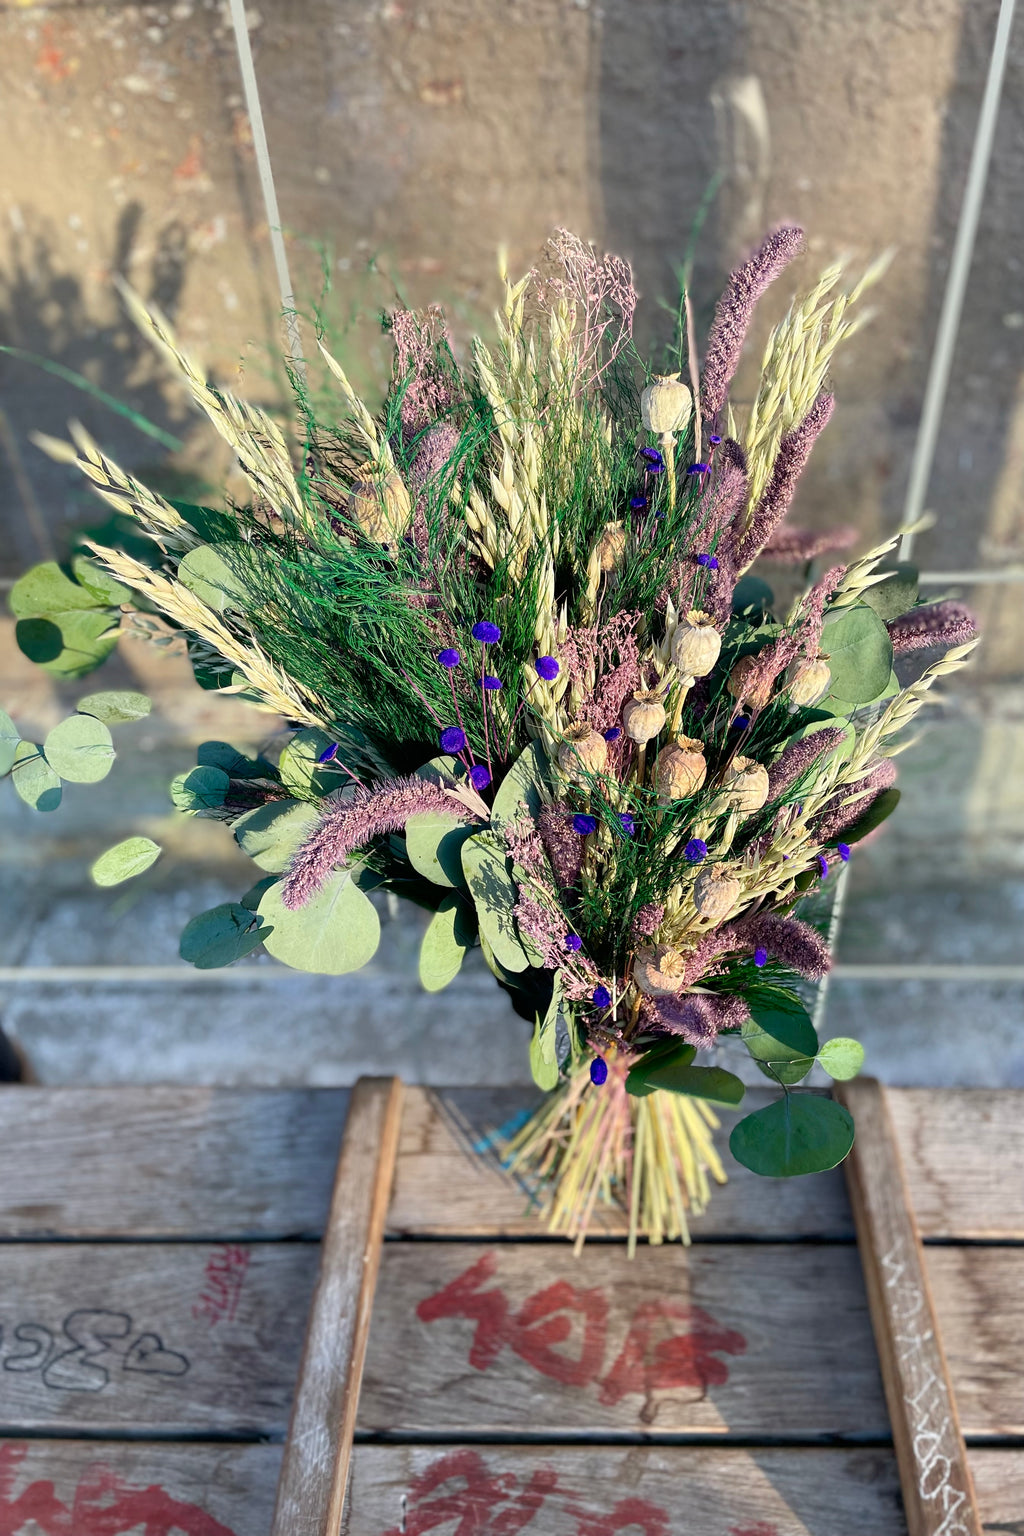 Dried Florals & Design by BBudgetChic on